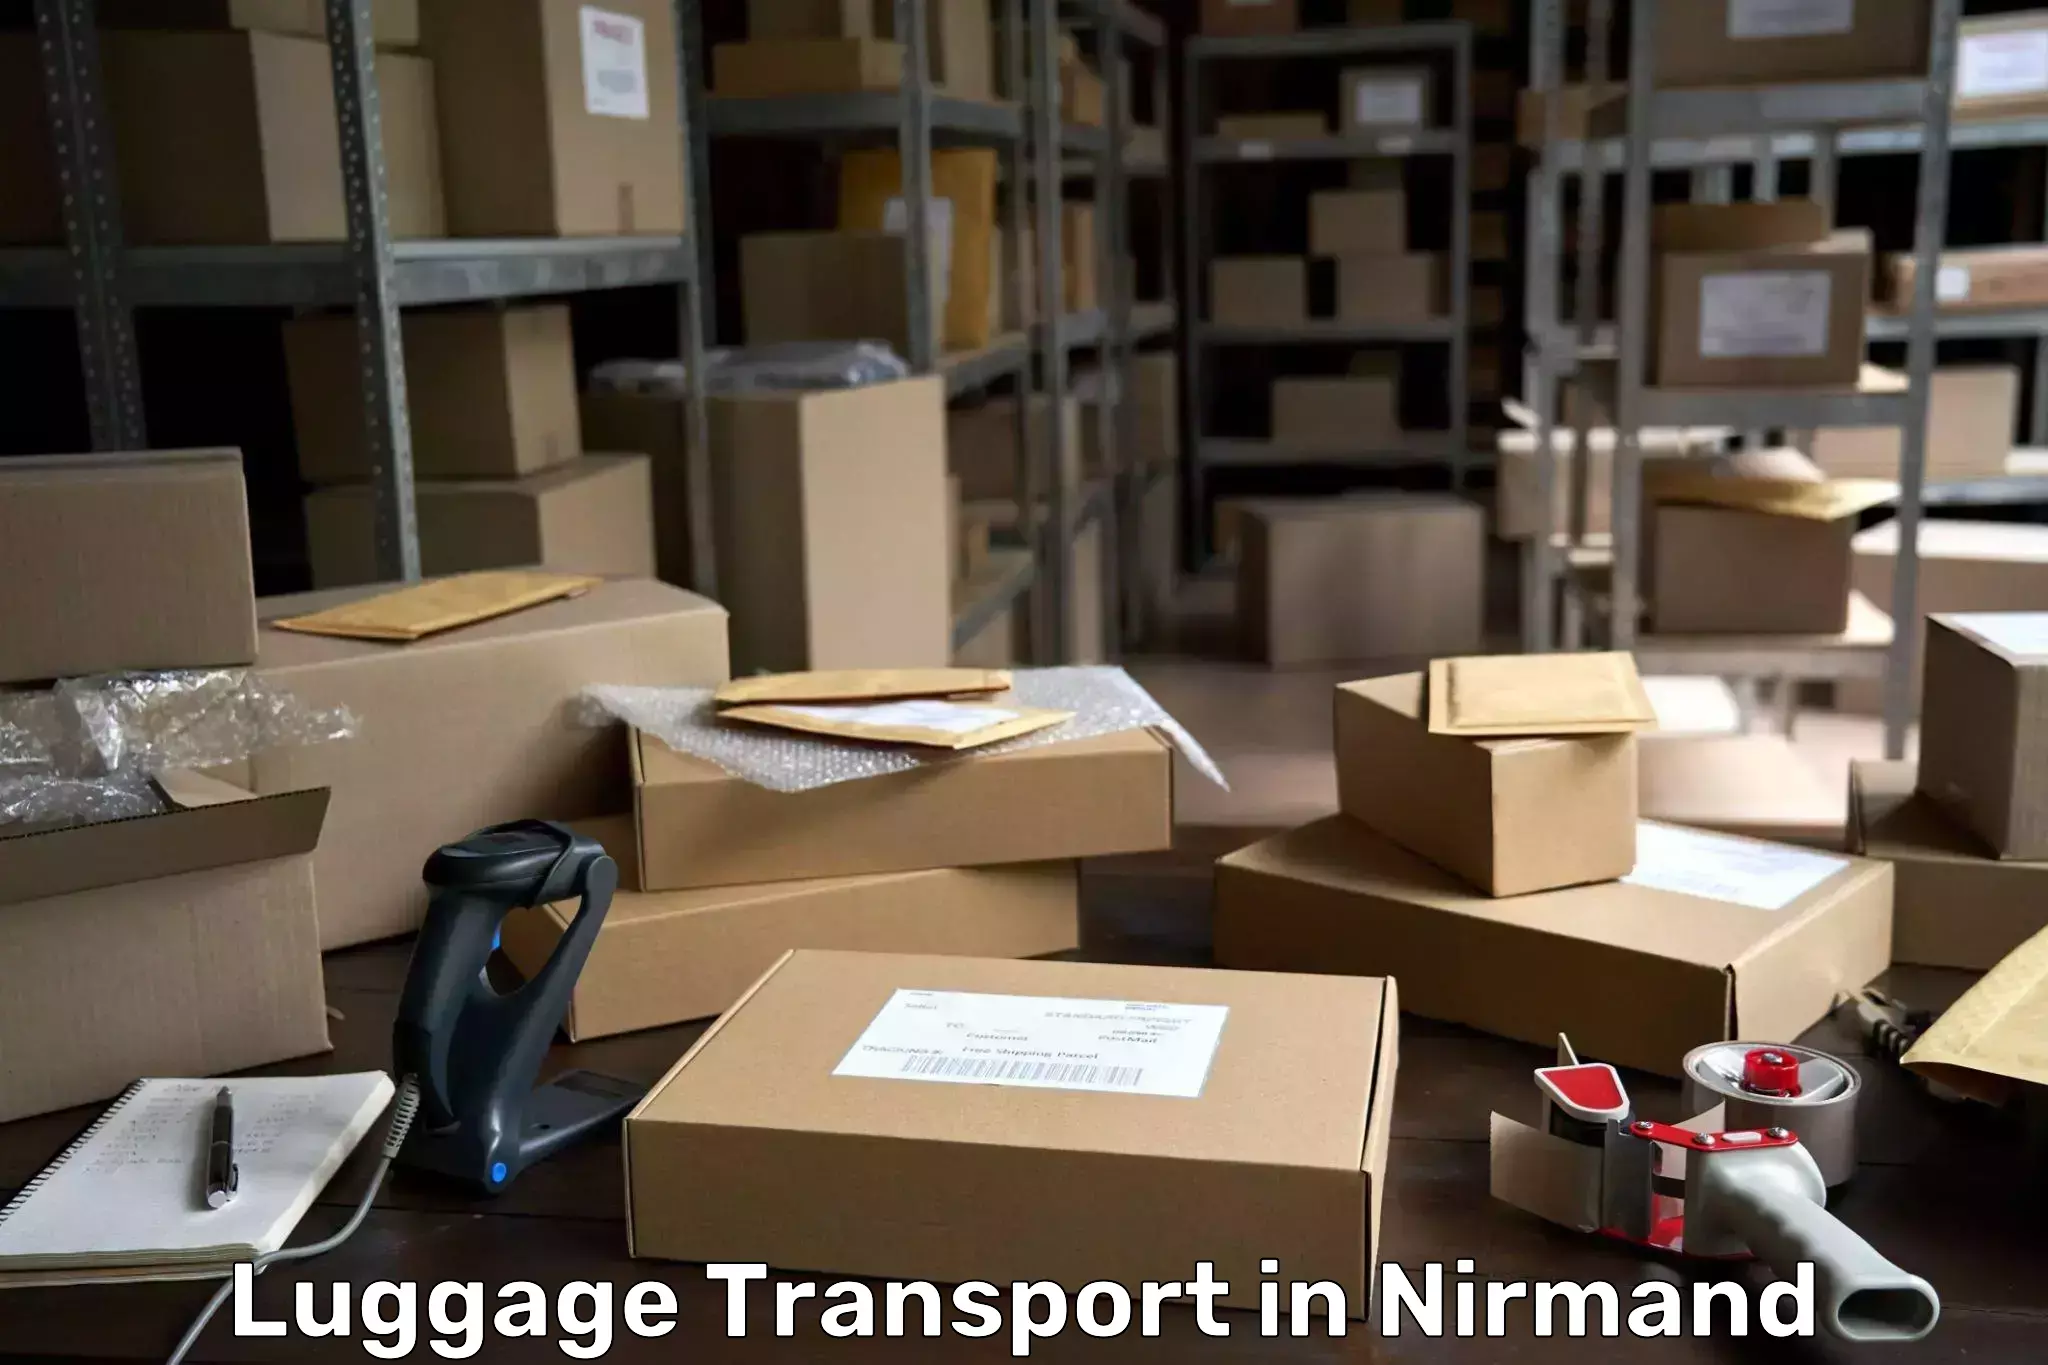 Doorstep luggage collection in Nirmand